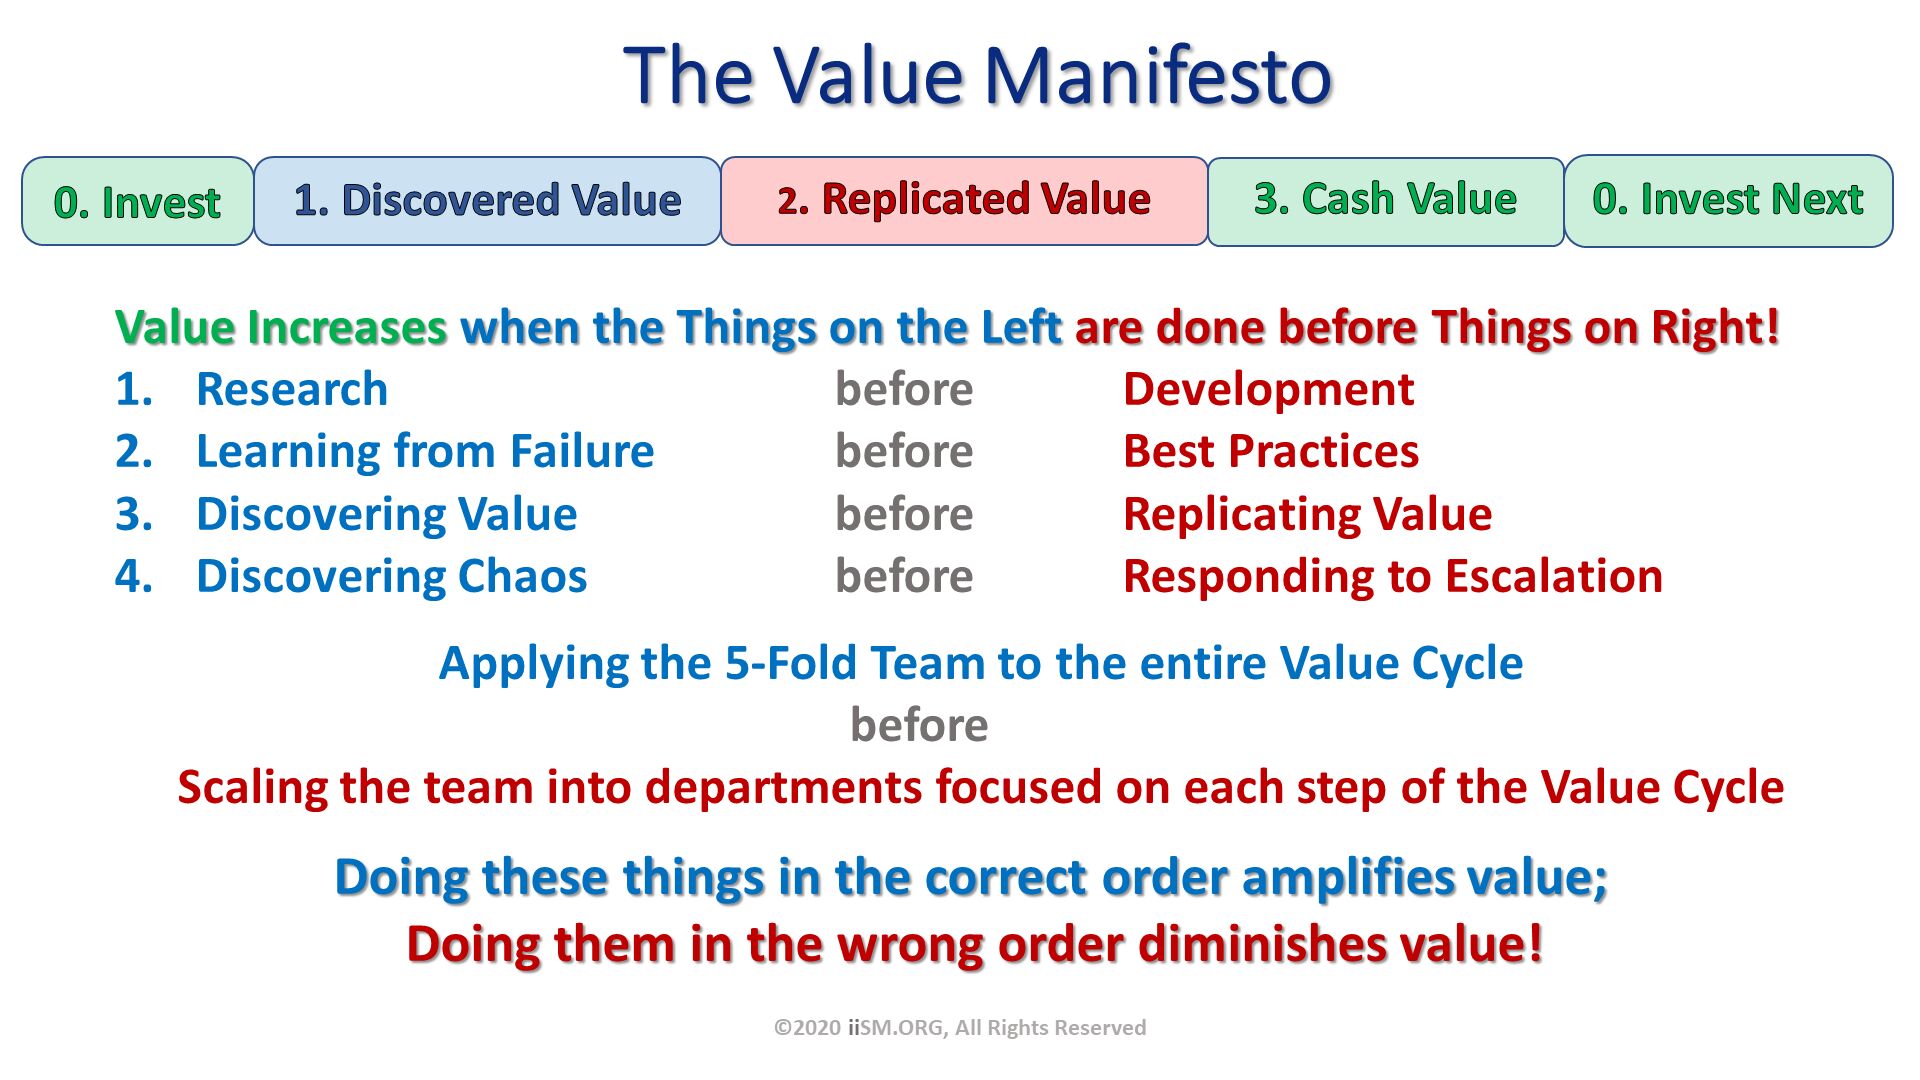 The Value Manifesto. Value Increases when the Things on the Left are done before Things on Right!
Research	    			before		Development
Learning from Failure		before		Best Practices
Discovering Value 		before 	Replicating Value
Discovering Chaos 		before 	Responding to Escalation
Applying the 5-Fold Team to the entire Value Cycle before	Scaling the team into departments focused on each step of the Value Cycle
Doing these things in the correct order amplifies value; 	
Doing them in the wrong order diminishes value!	. ©2020 iiSM.ORG, All Rights Reserved. 